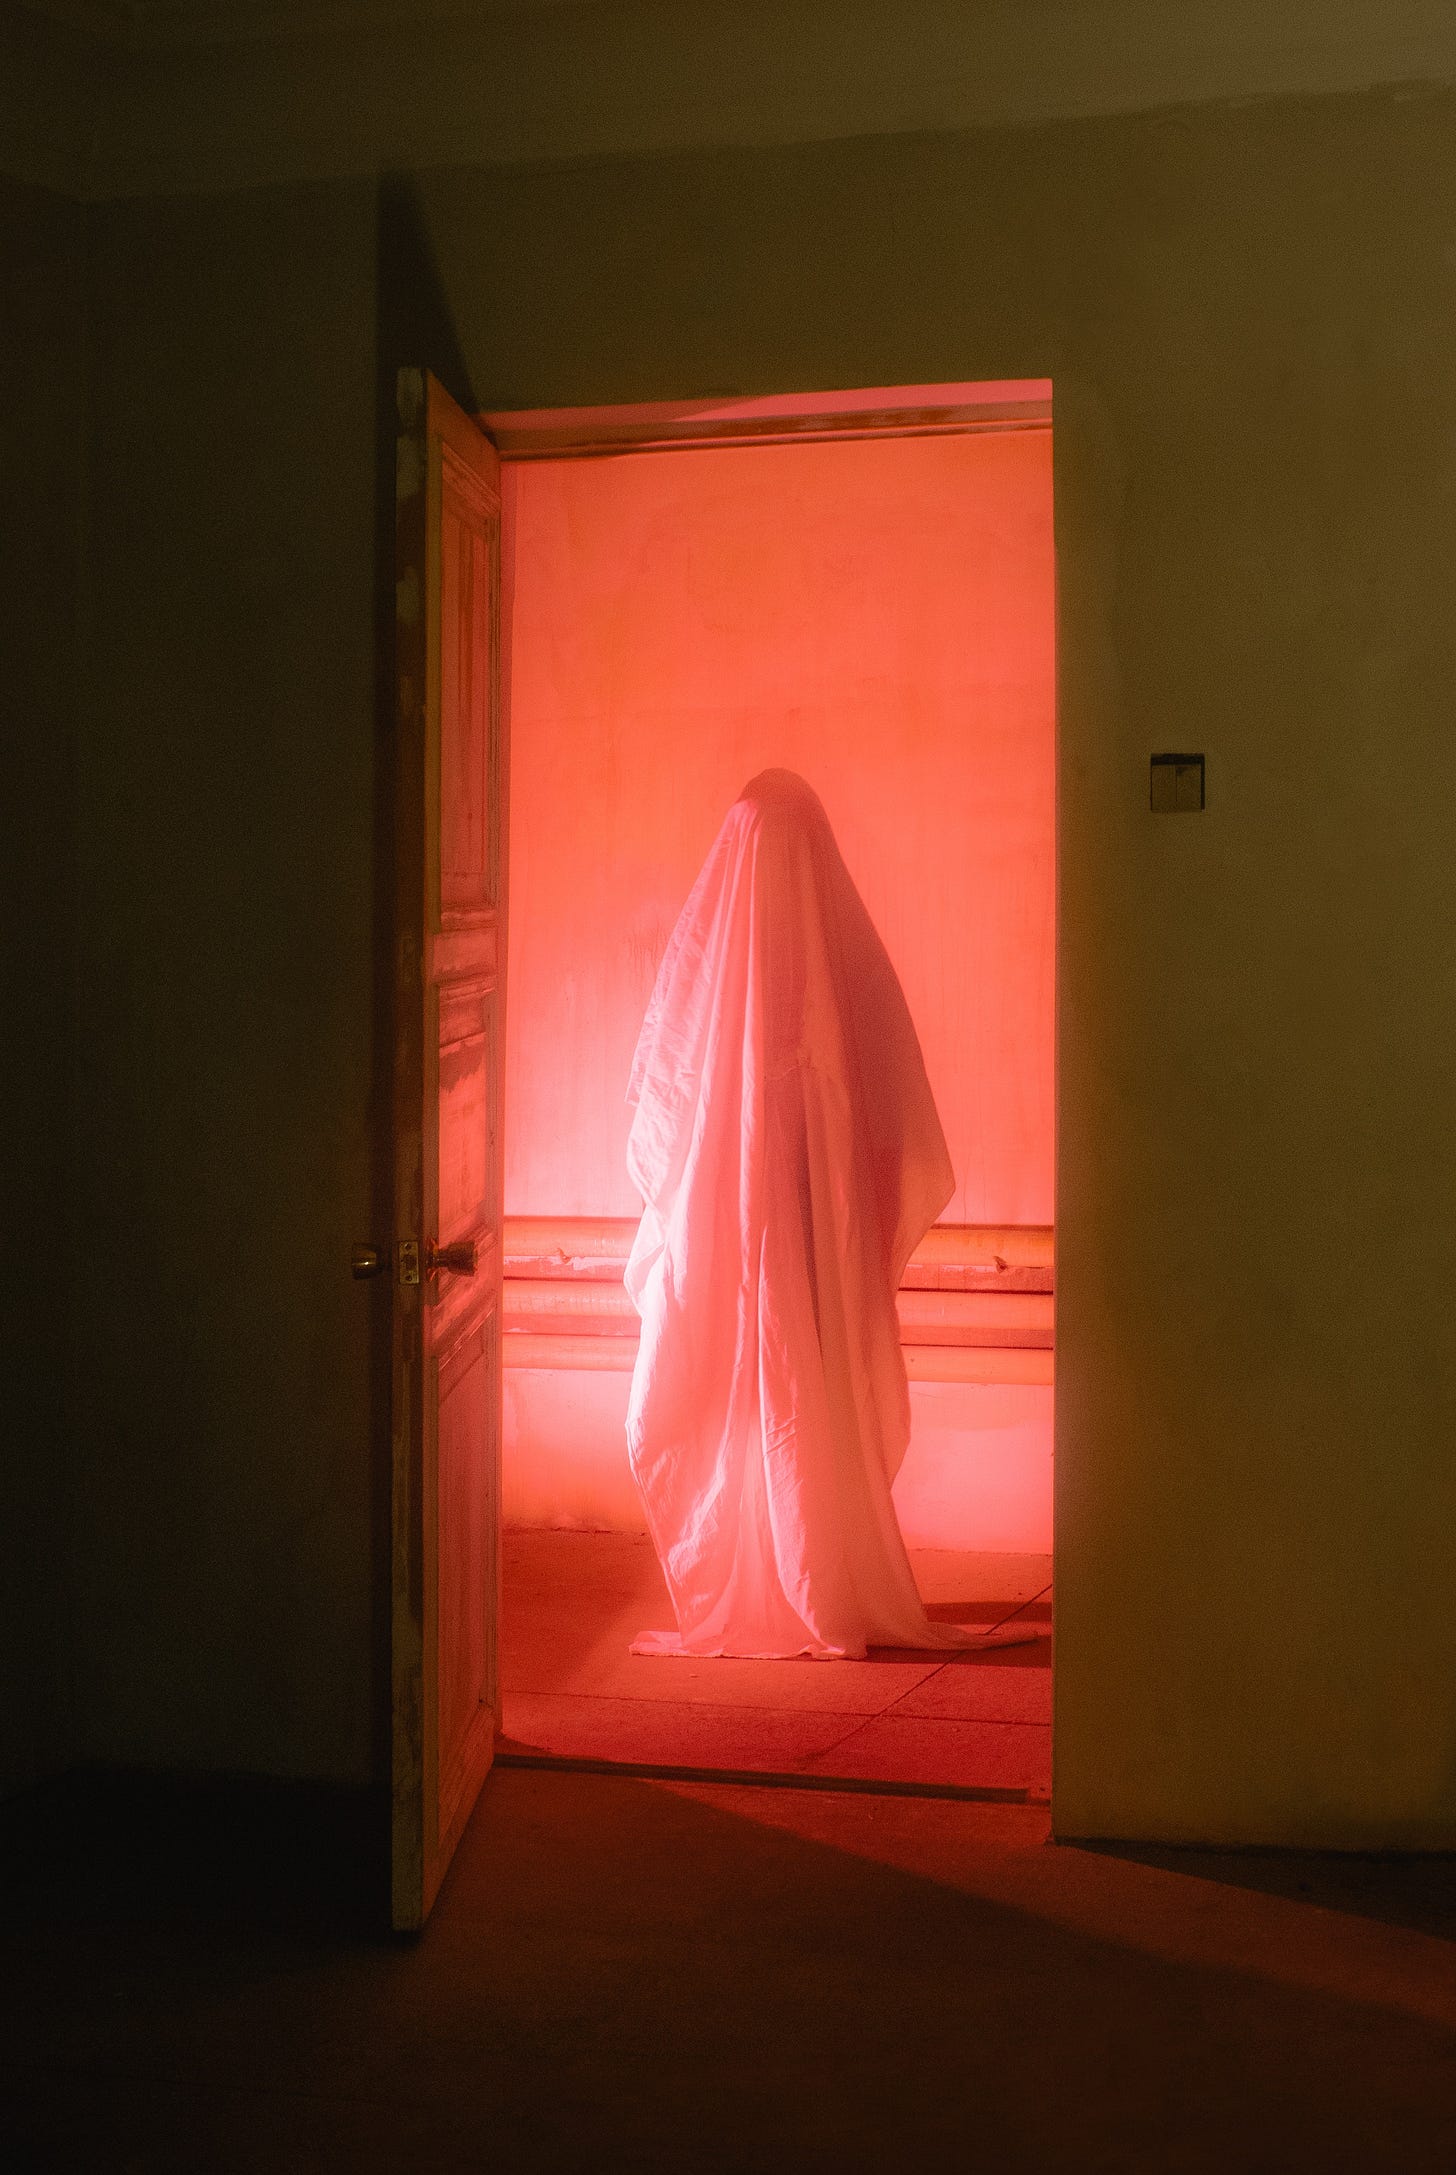 A sheet ghost floating in midair in a hallway, bathed in pink light.